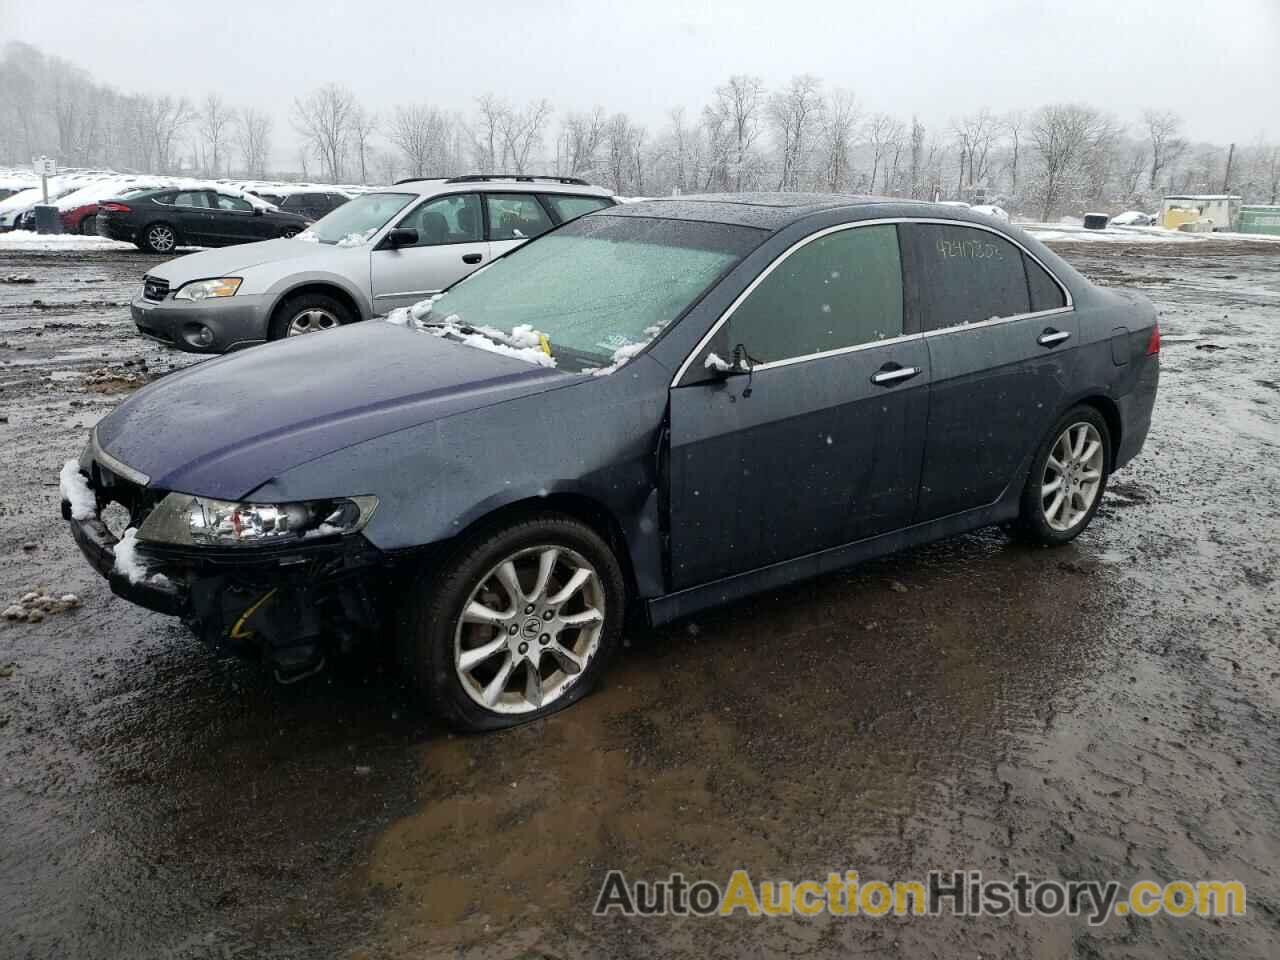 2008 ACURA TSX, JH4CL96938C012019